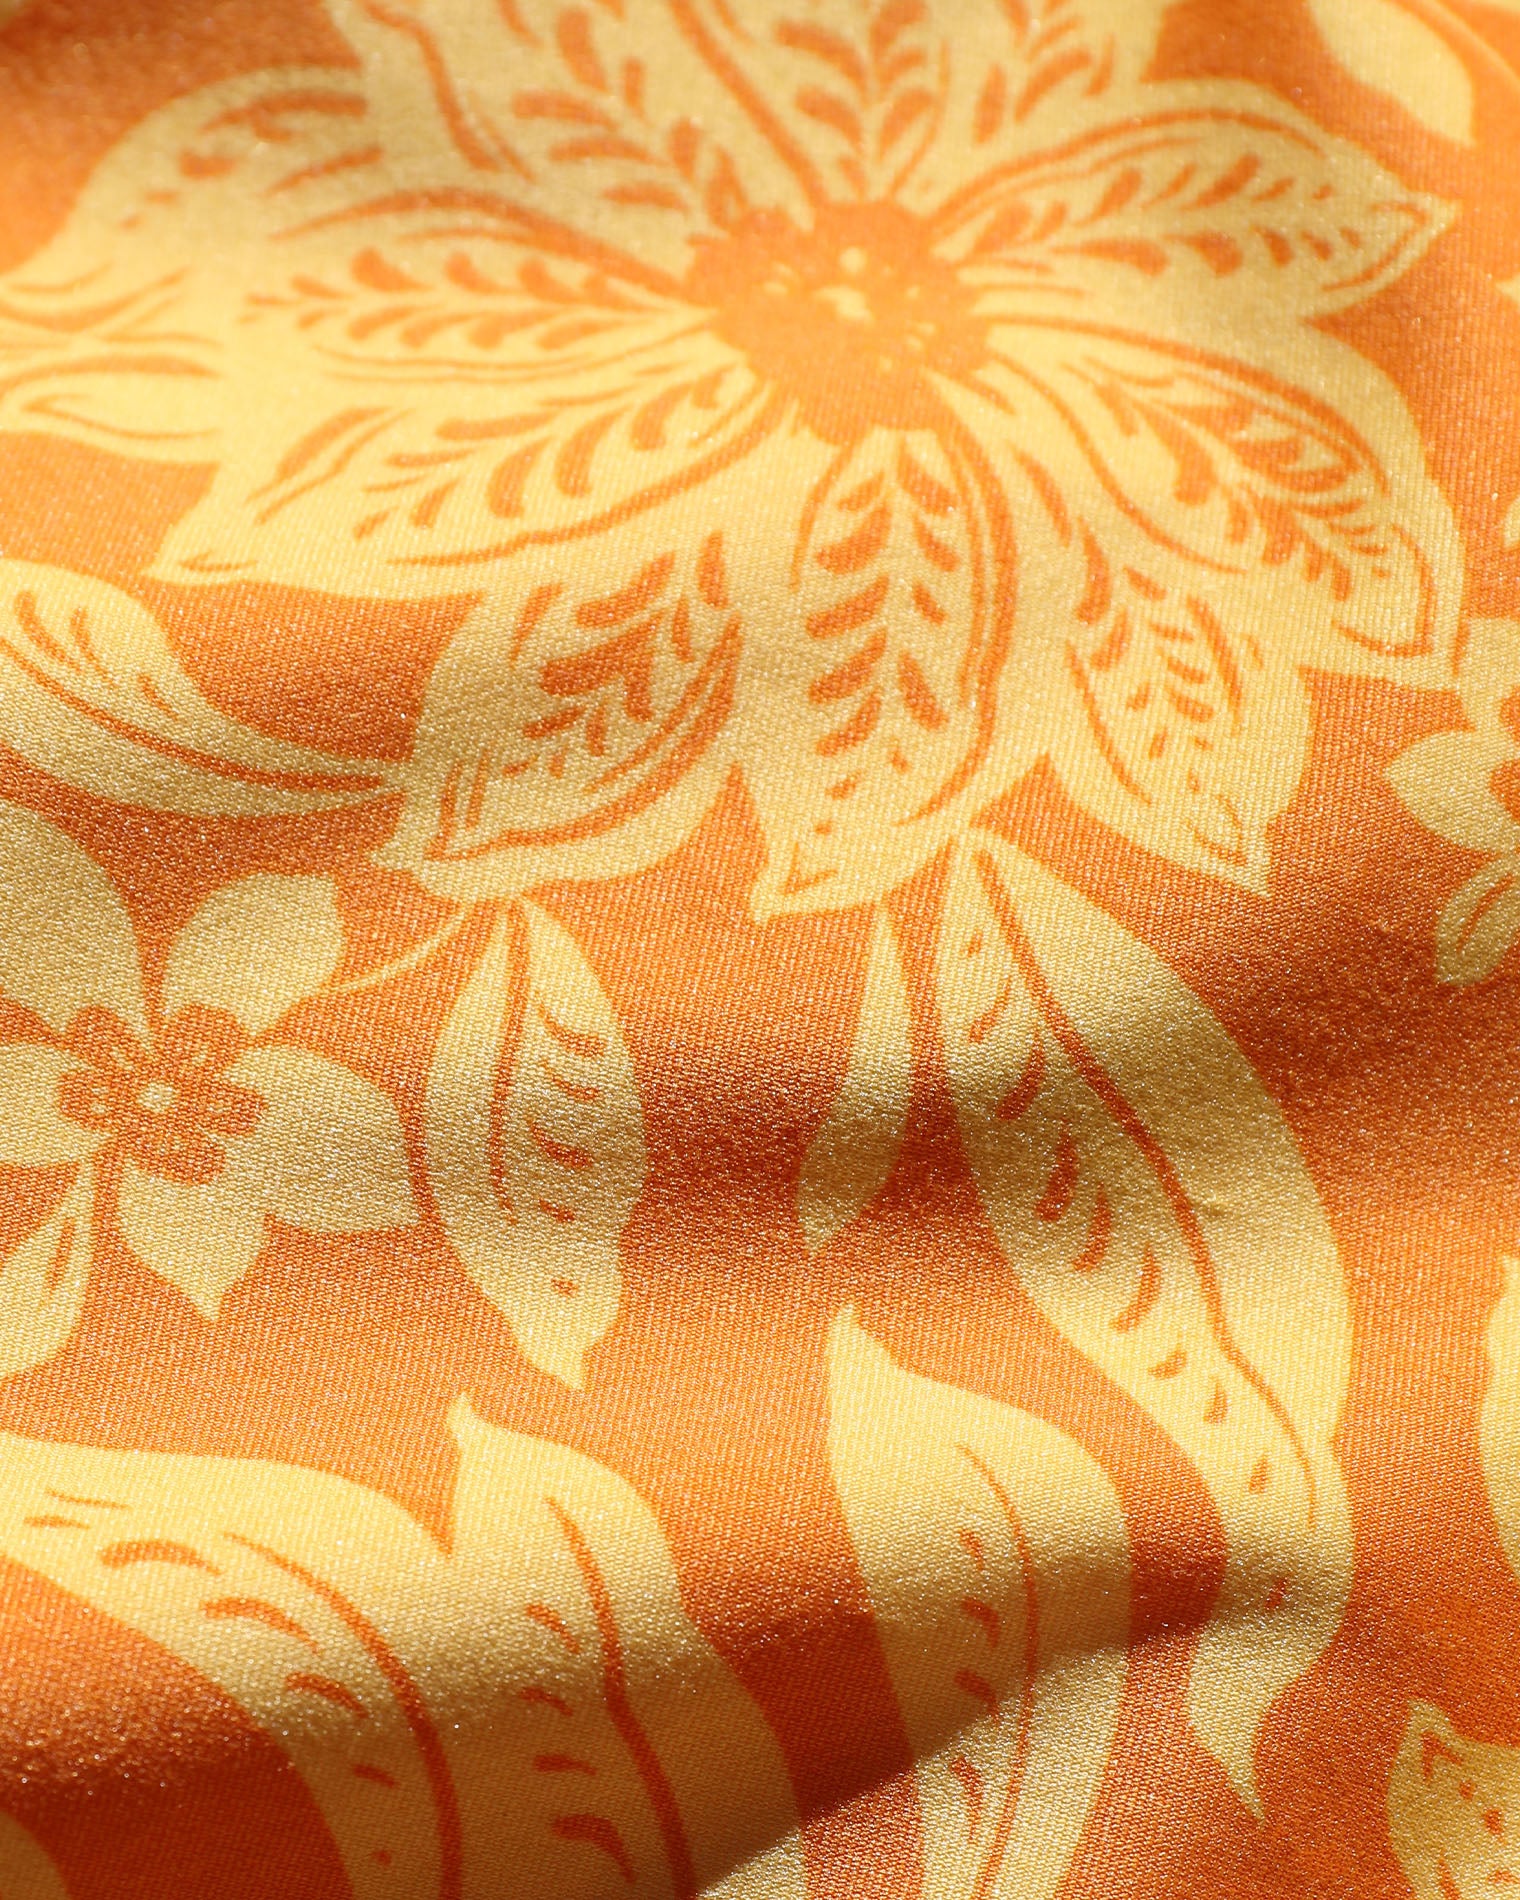 Printed Kendal One Piece - Golden Hour Blooms Printed Kendal One Piece - Golden Hour Blooms